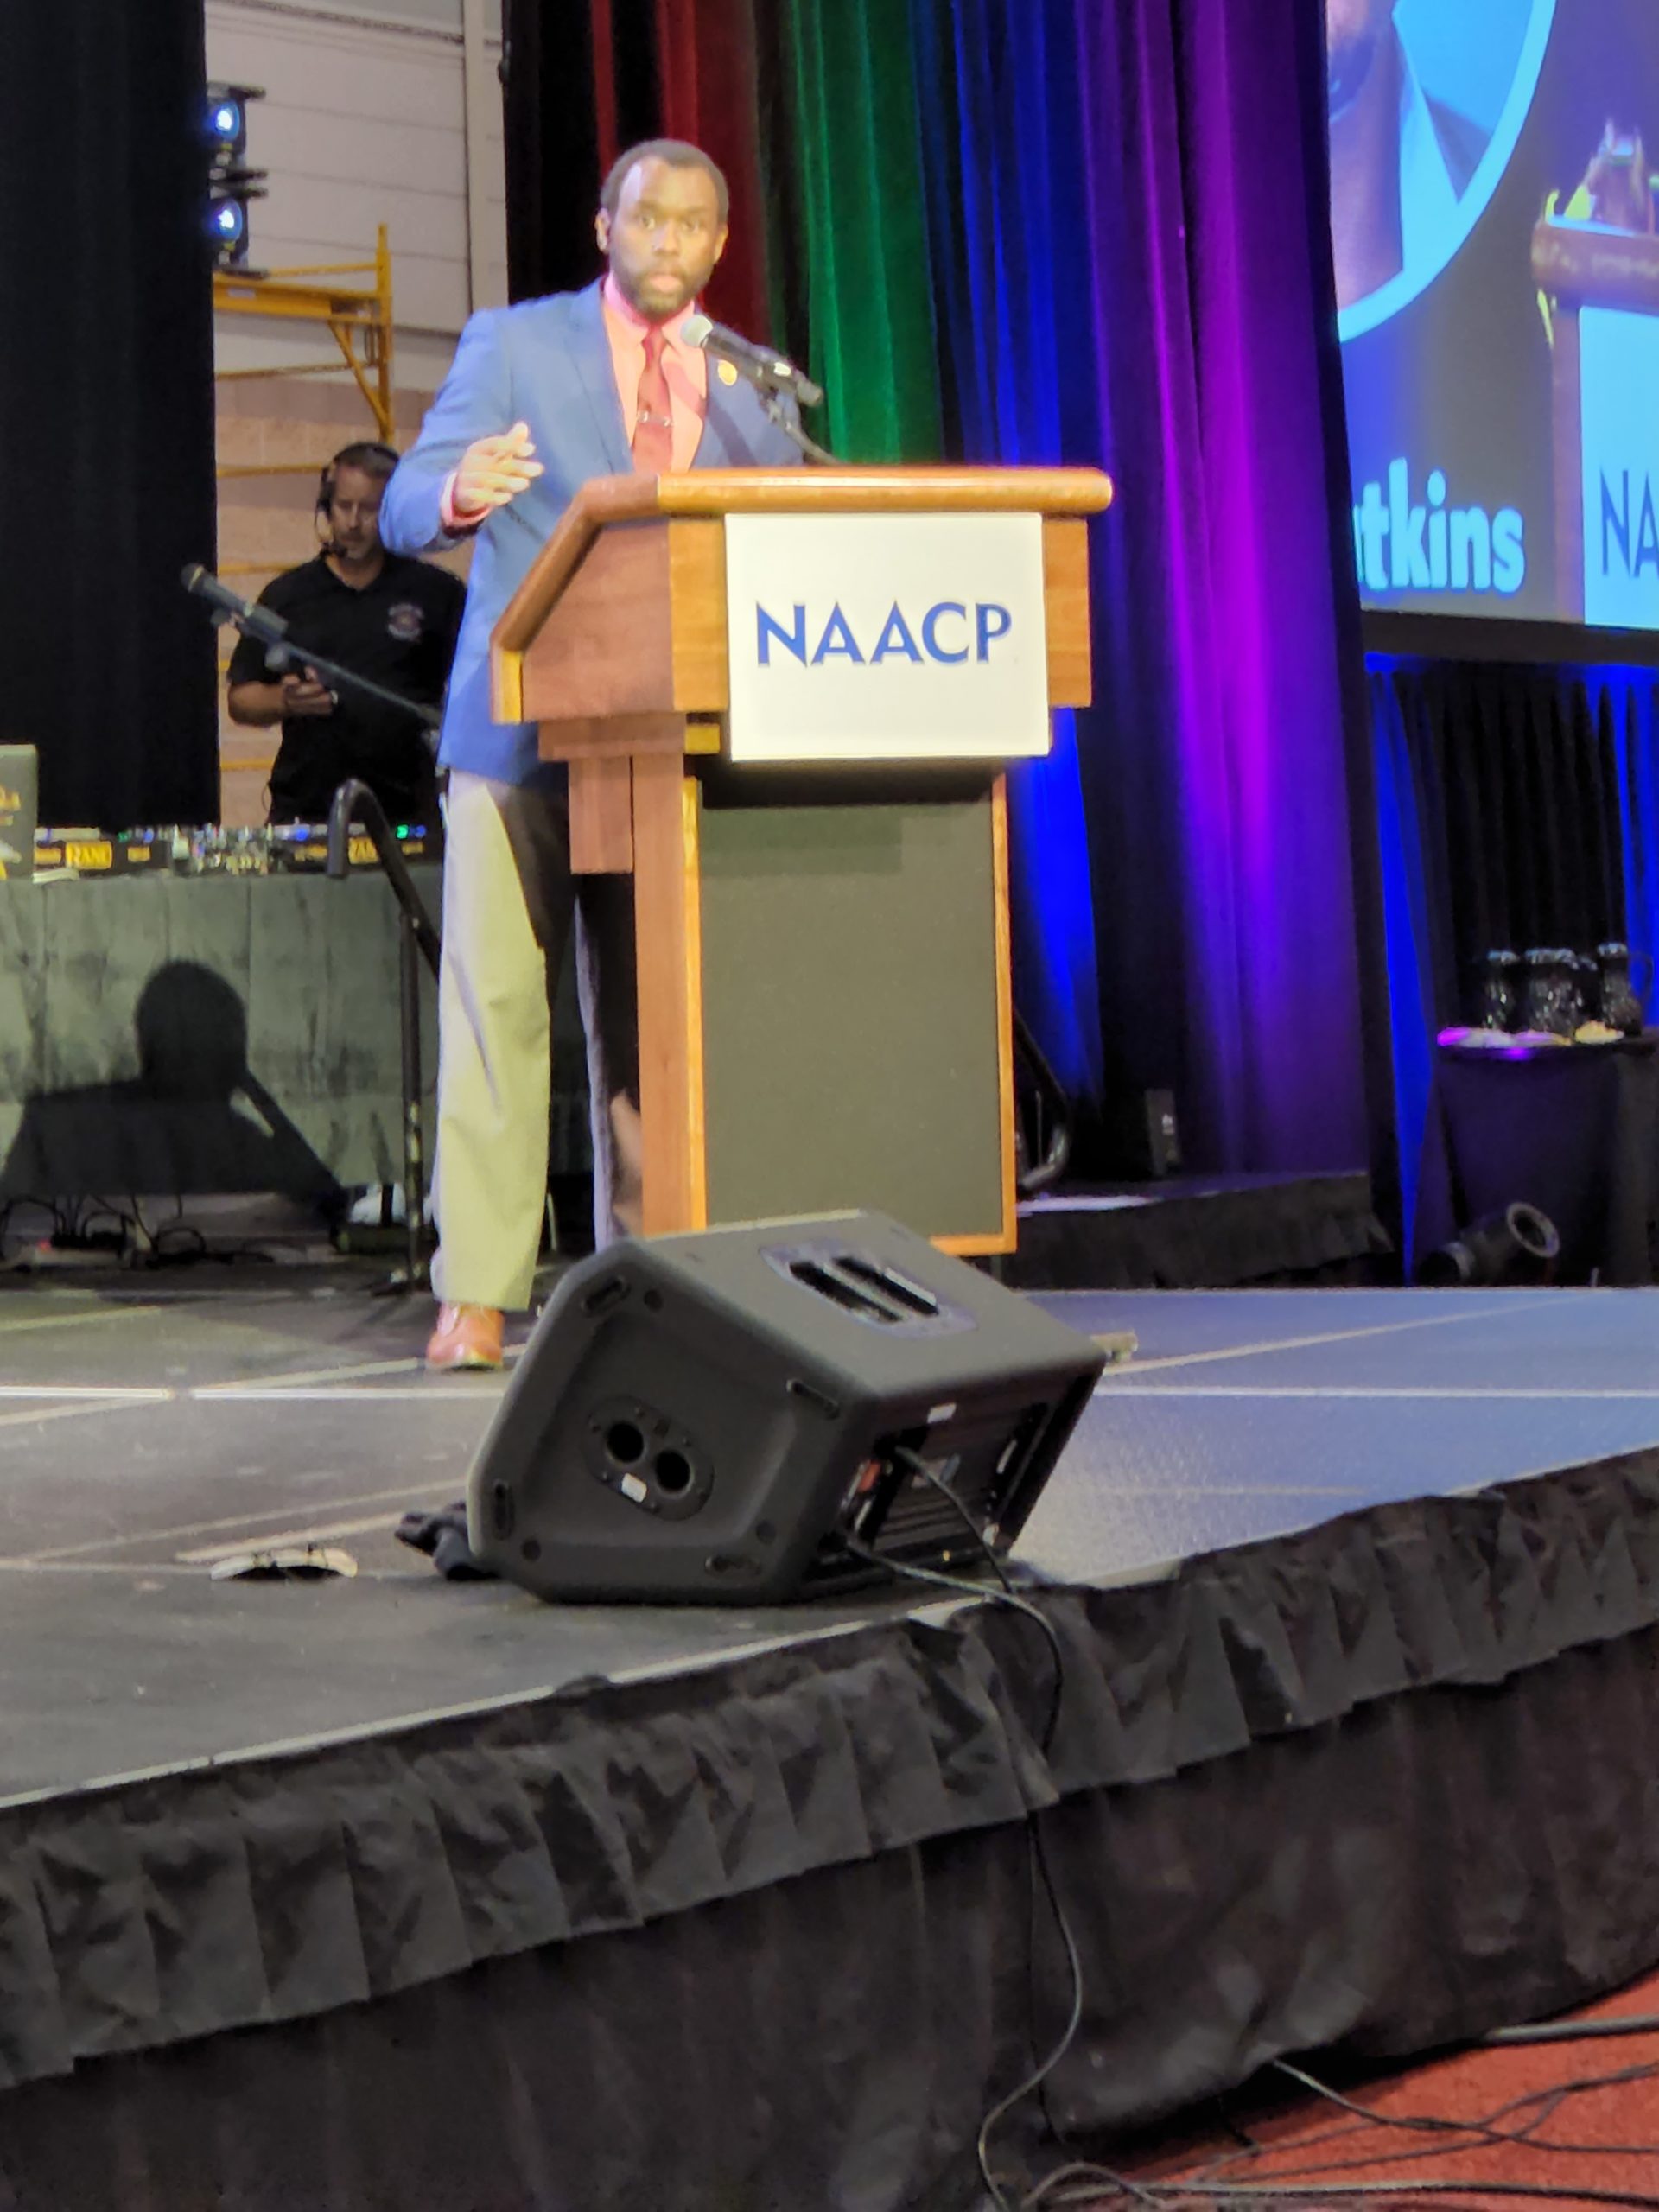 A man in a jacket and tie speaks from a podium with an "NAACP" sign